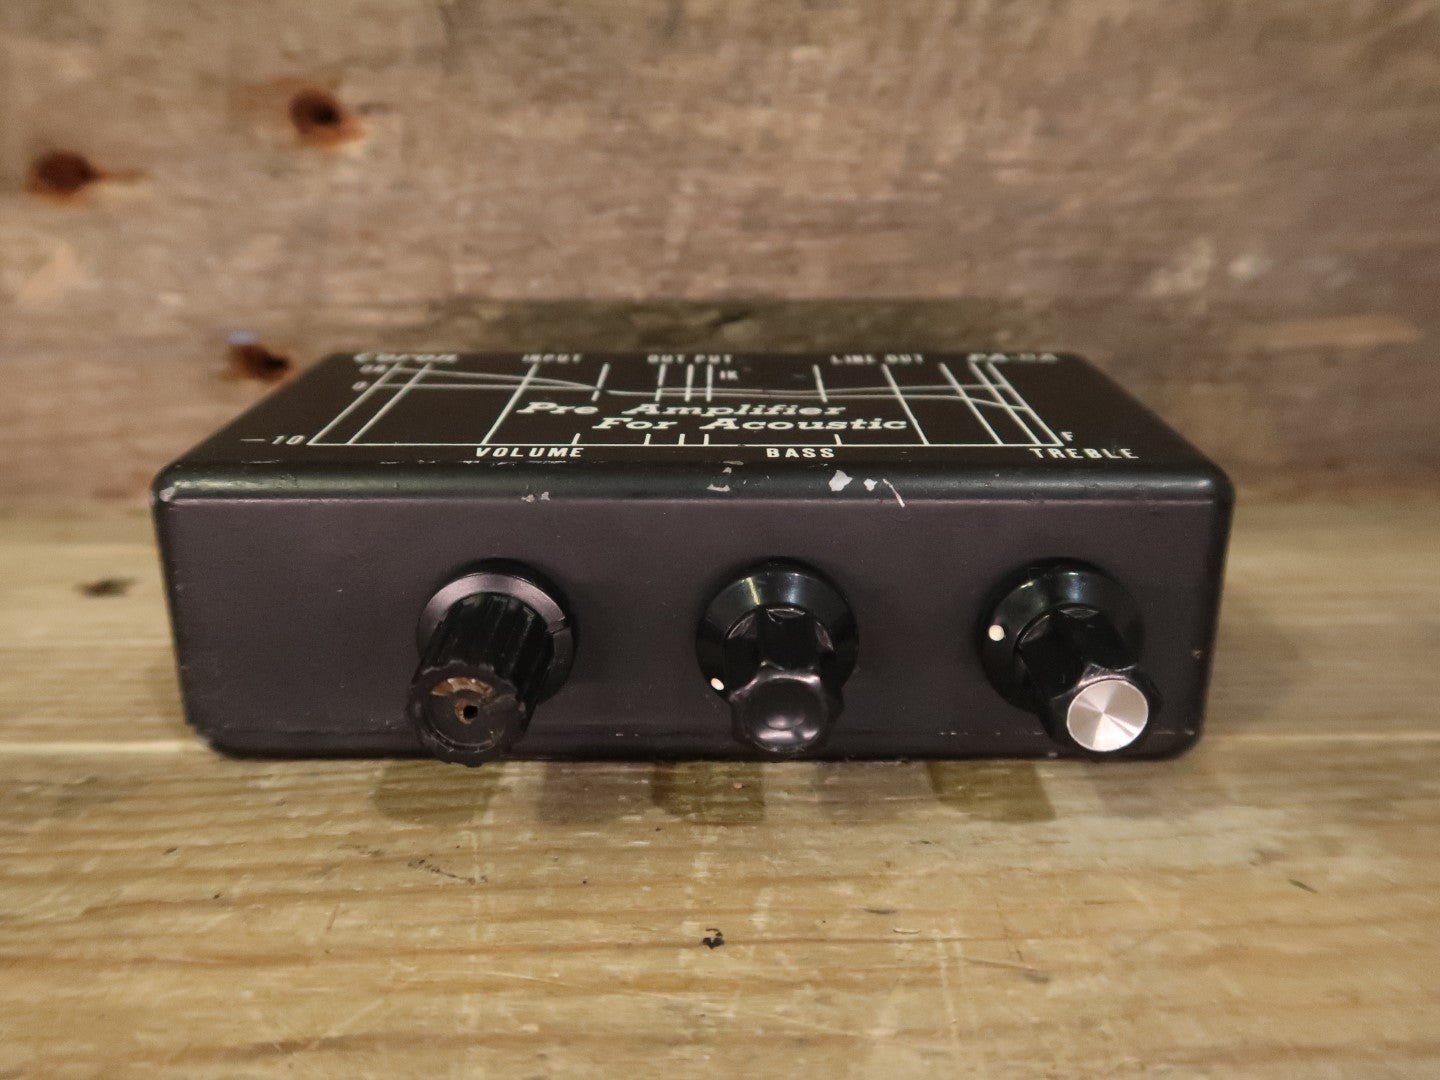 Coron PA-5A Pre Amplifier For Acoustic (Vintage and Rare)